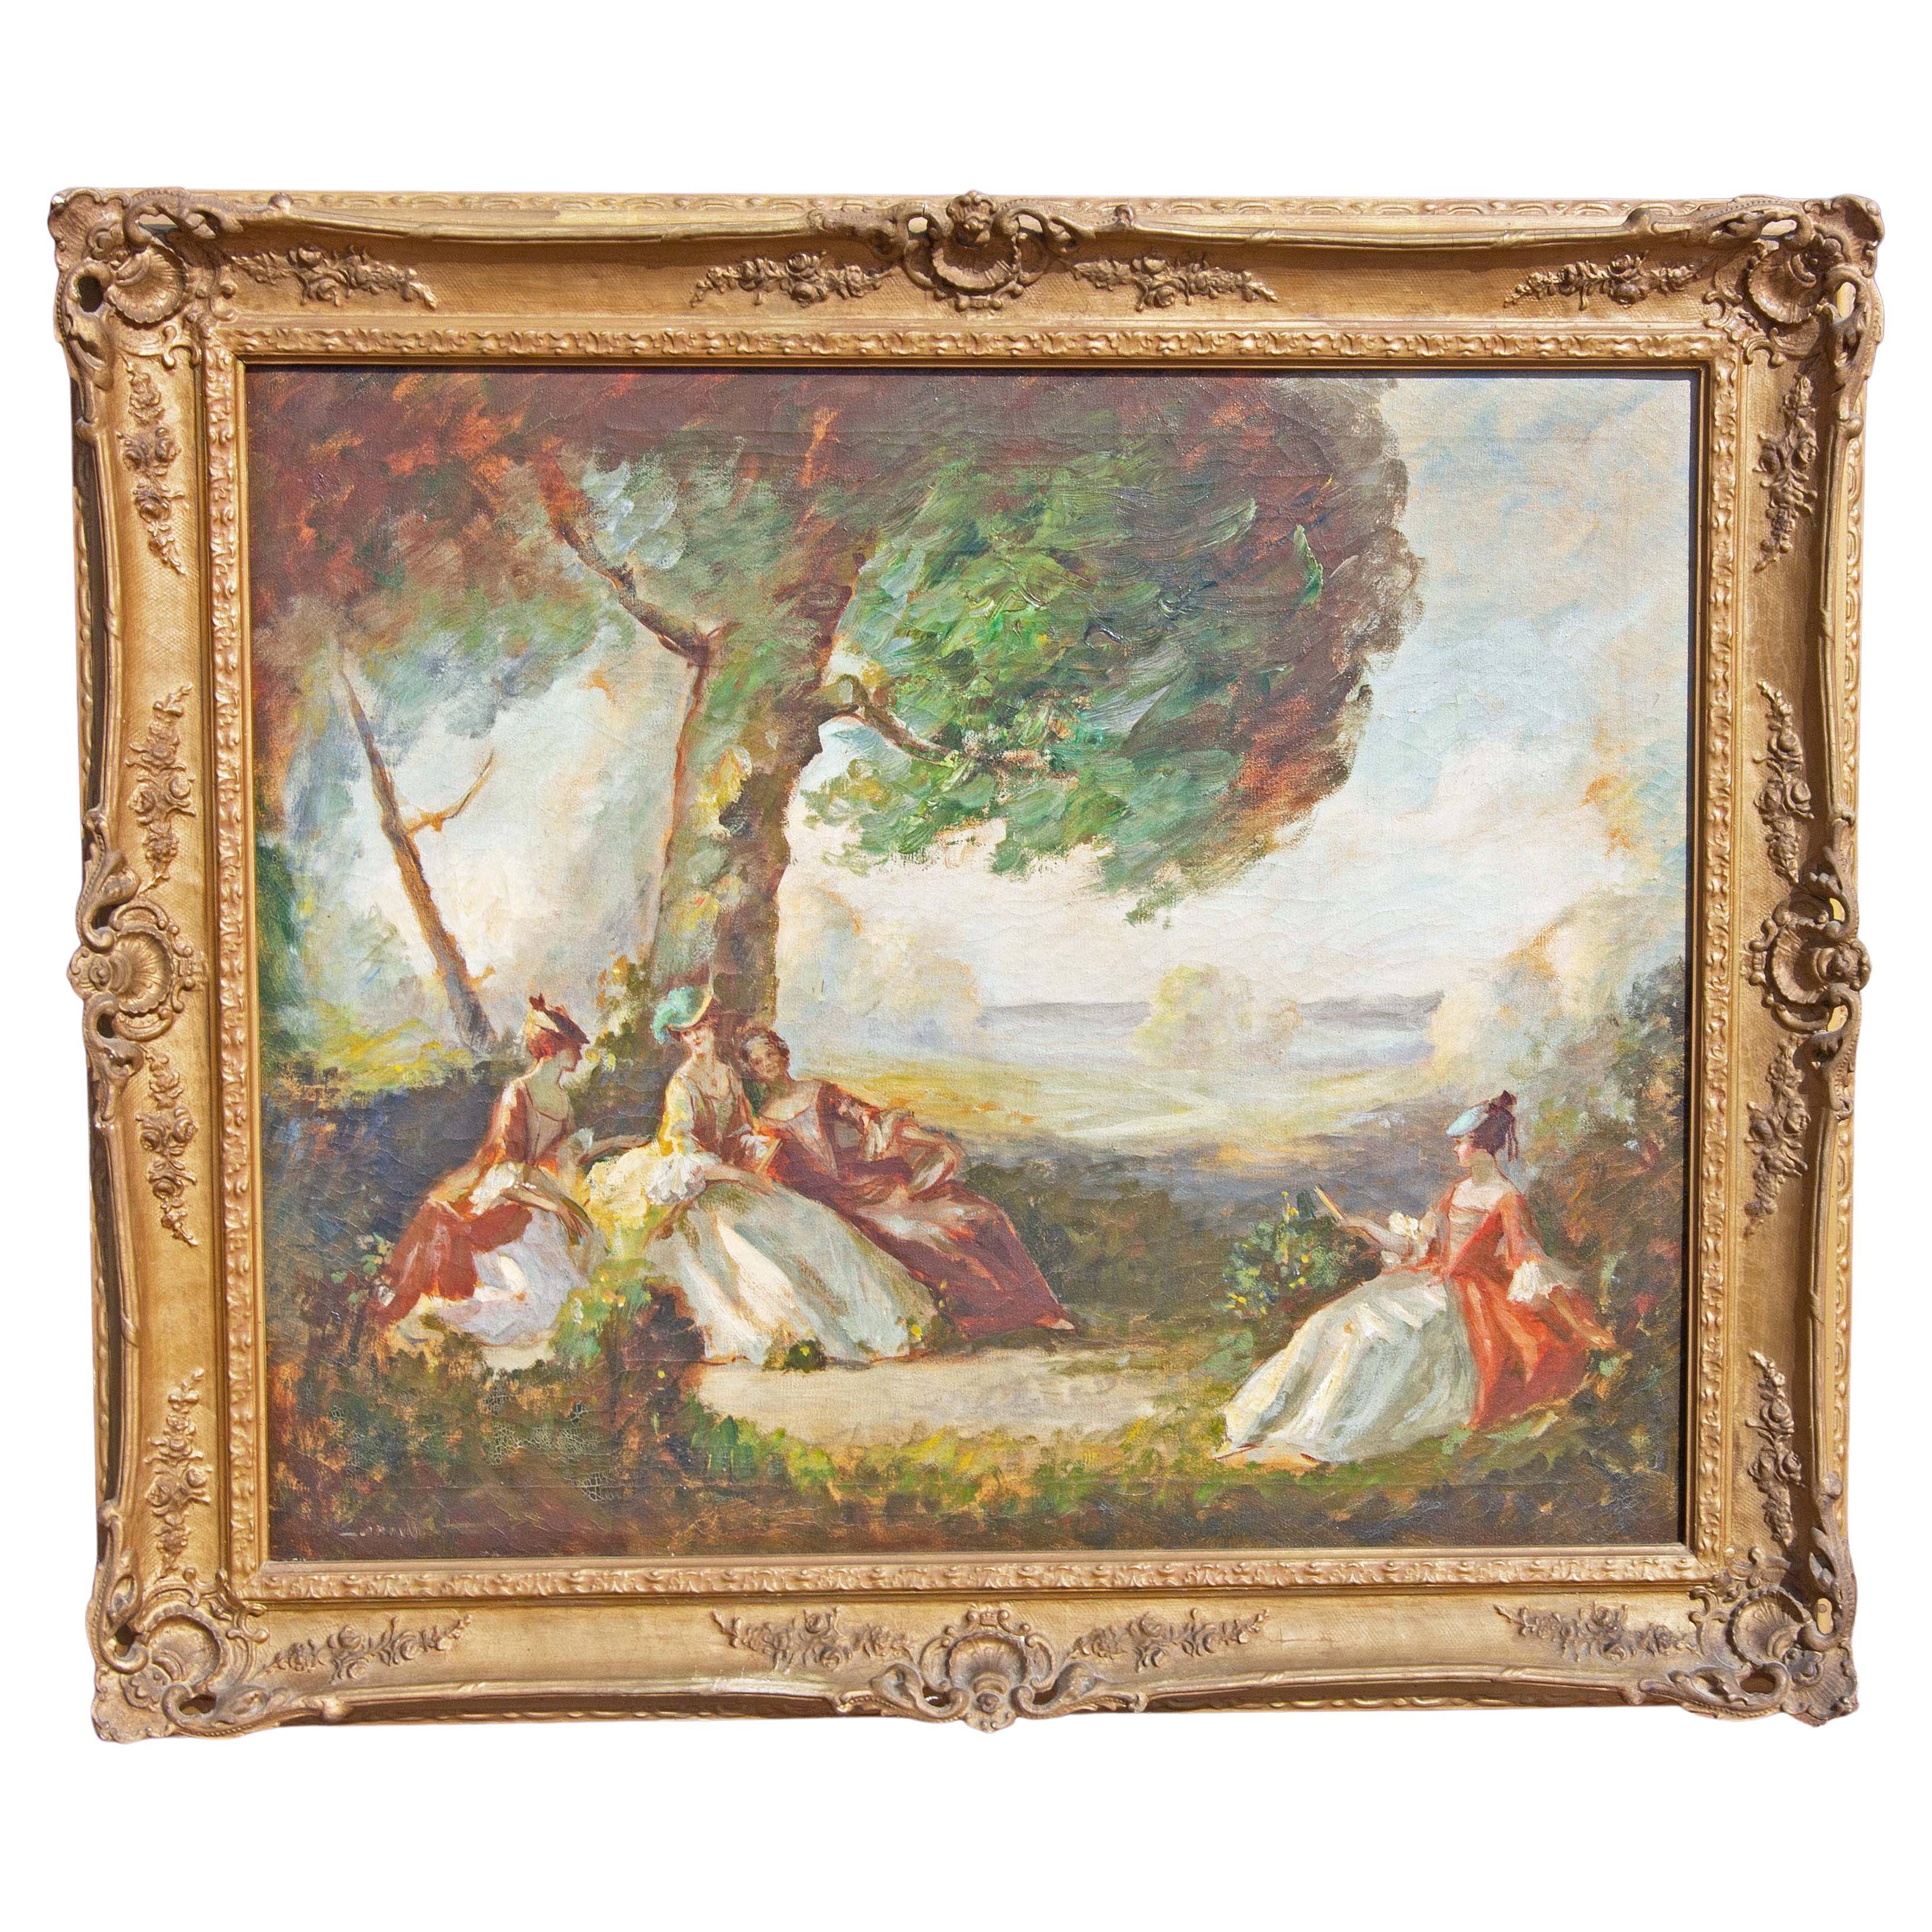 French impressionist style painting. Oil on canvas. Signed illegibly. In the original frame. Presented by Joseph Dasta Antiques